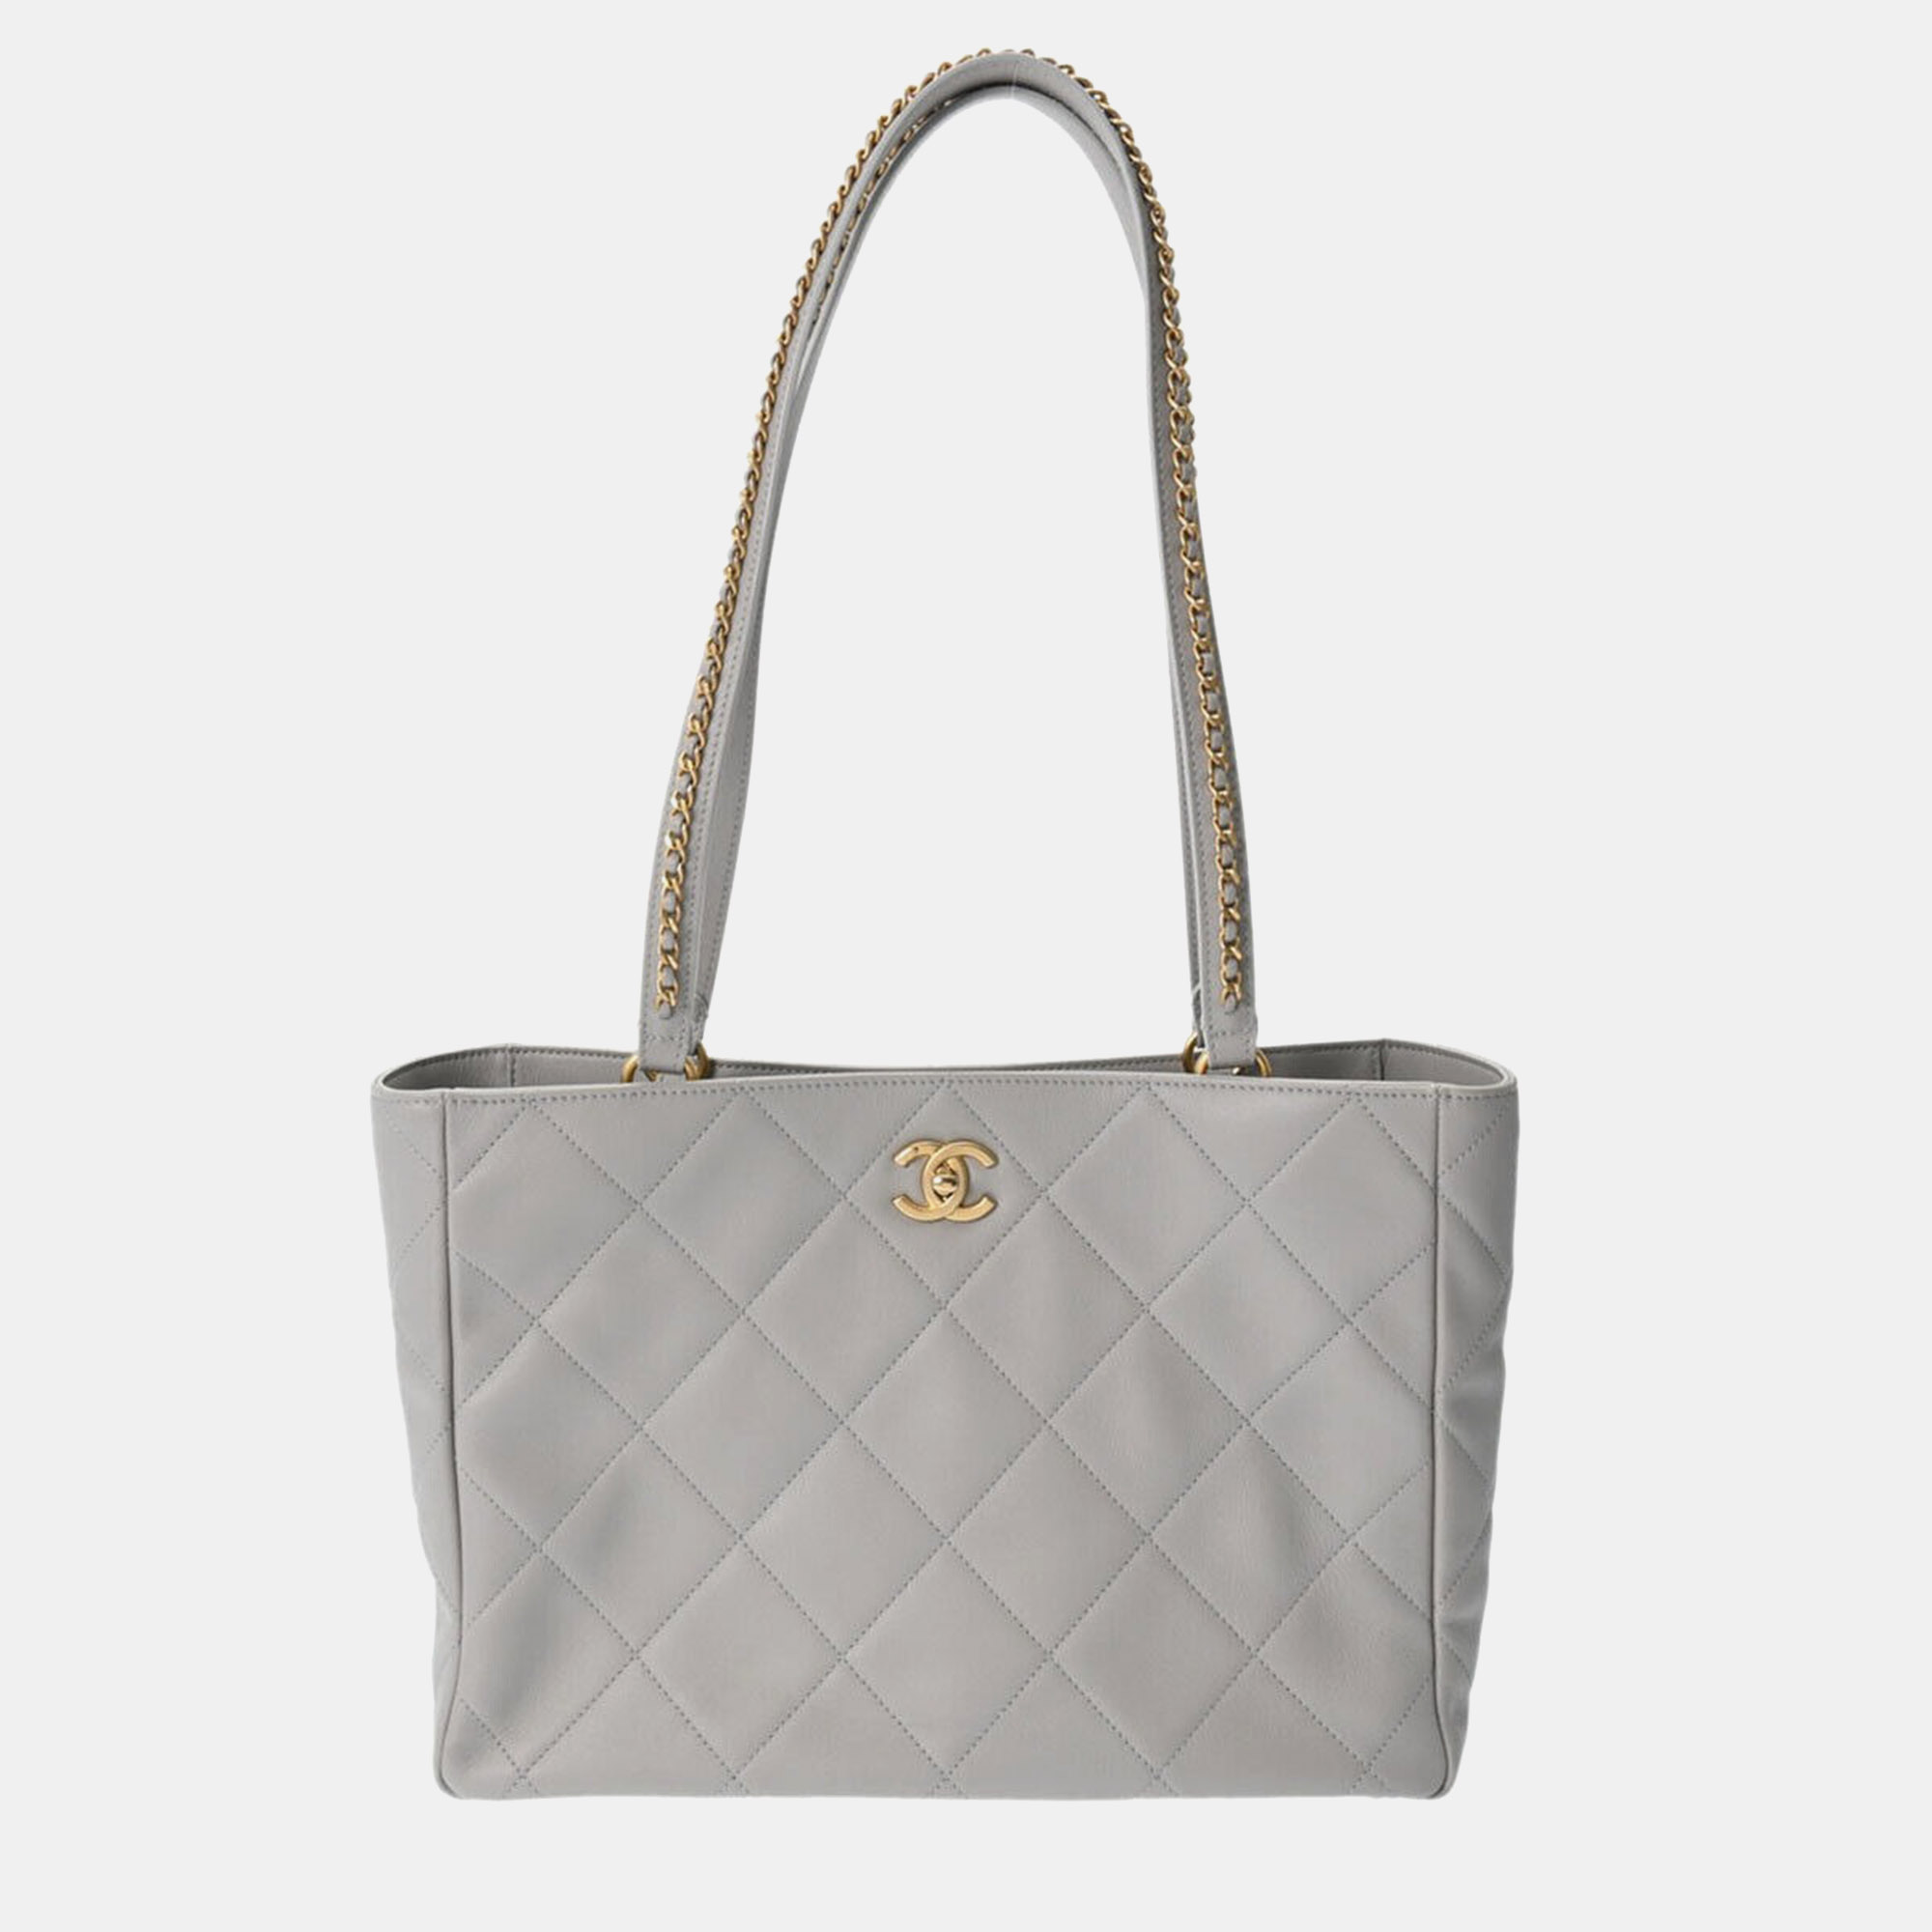 

Chanel Grey Leather CC Tote Bag